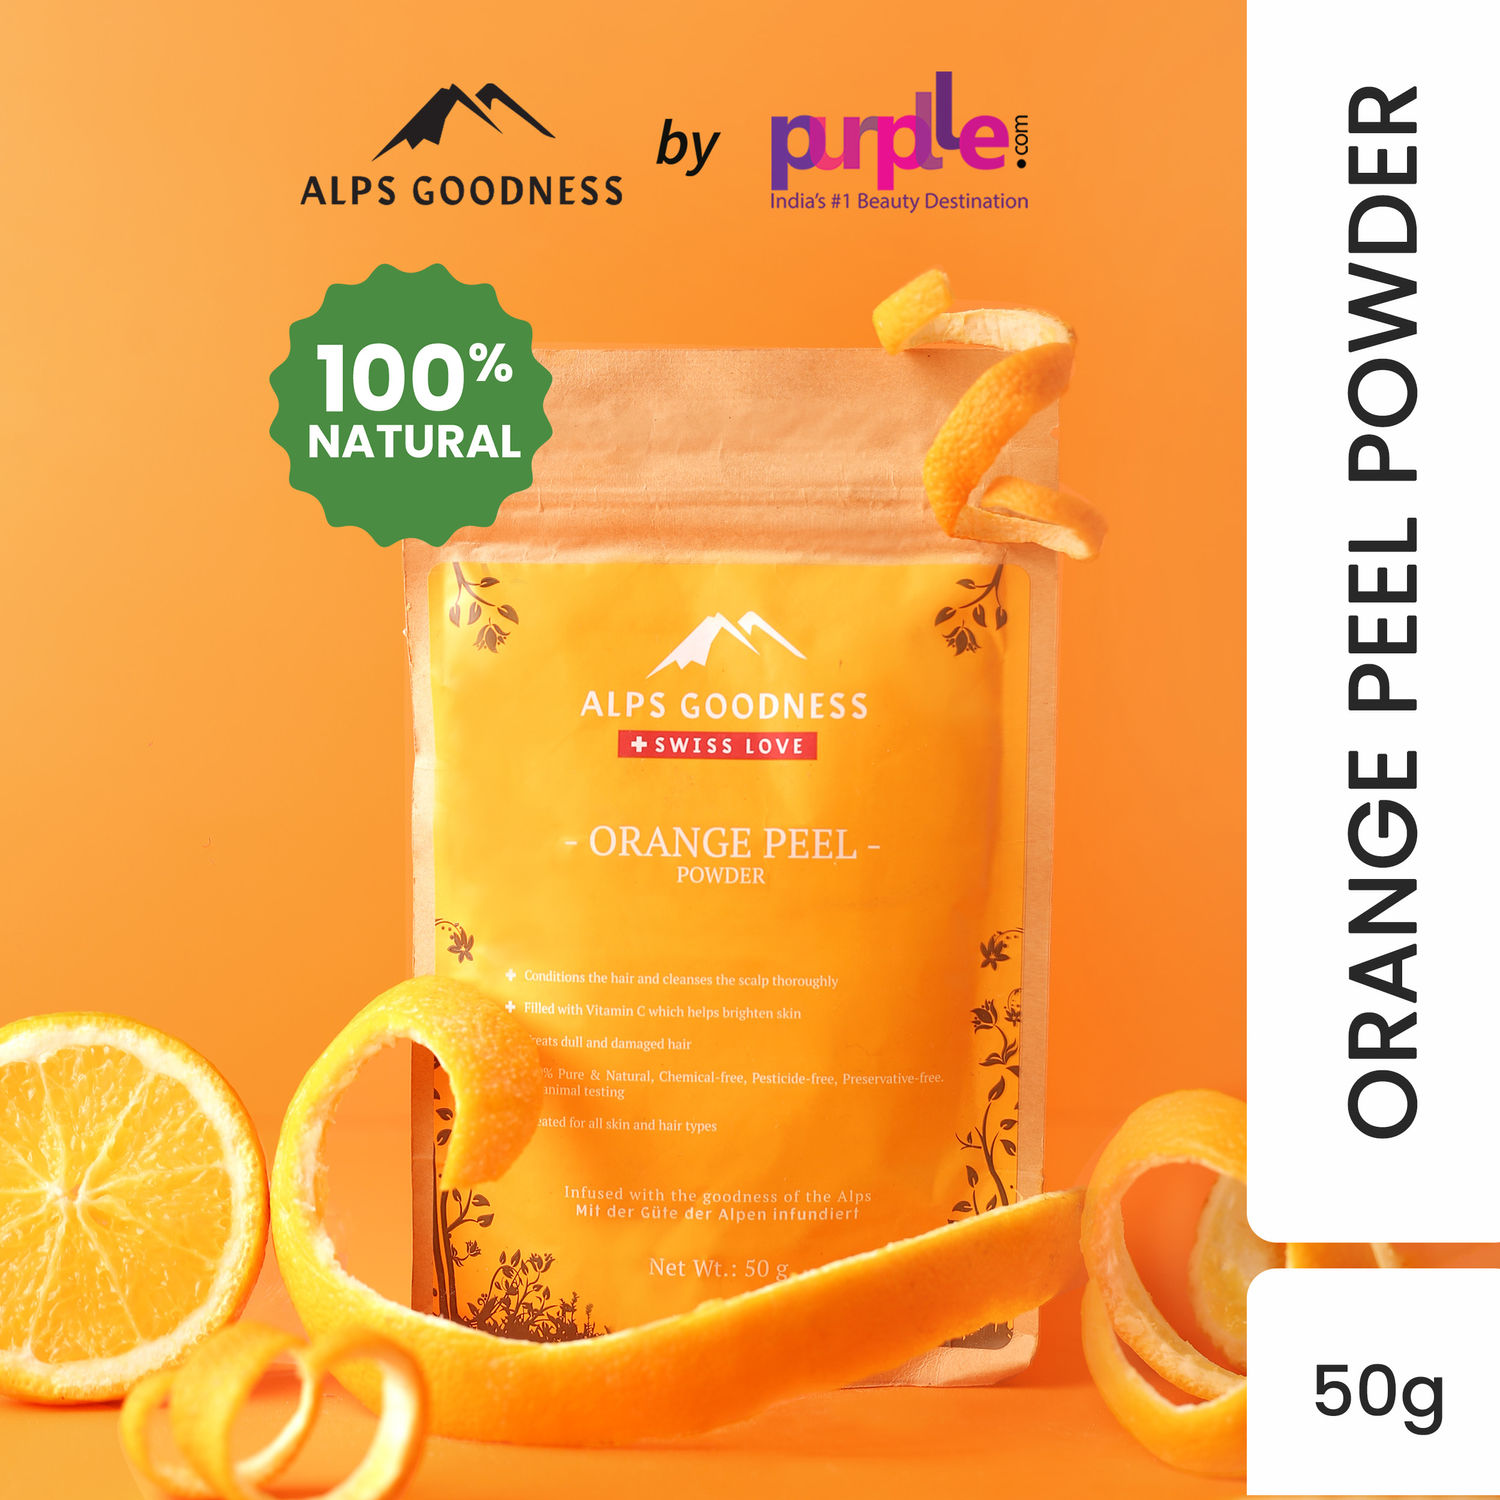 Alps Goodness Powder - Orange Peel (50 g)| 100% Natural Powder | No Chemicals, No Preservatives, No Pesticides | Can be used for Hair Mask and Face Mask | Nourishes hair follicles| Glow Face Pack| Orange Peel Face Pack